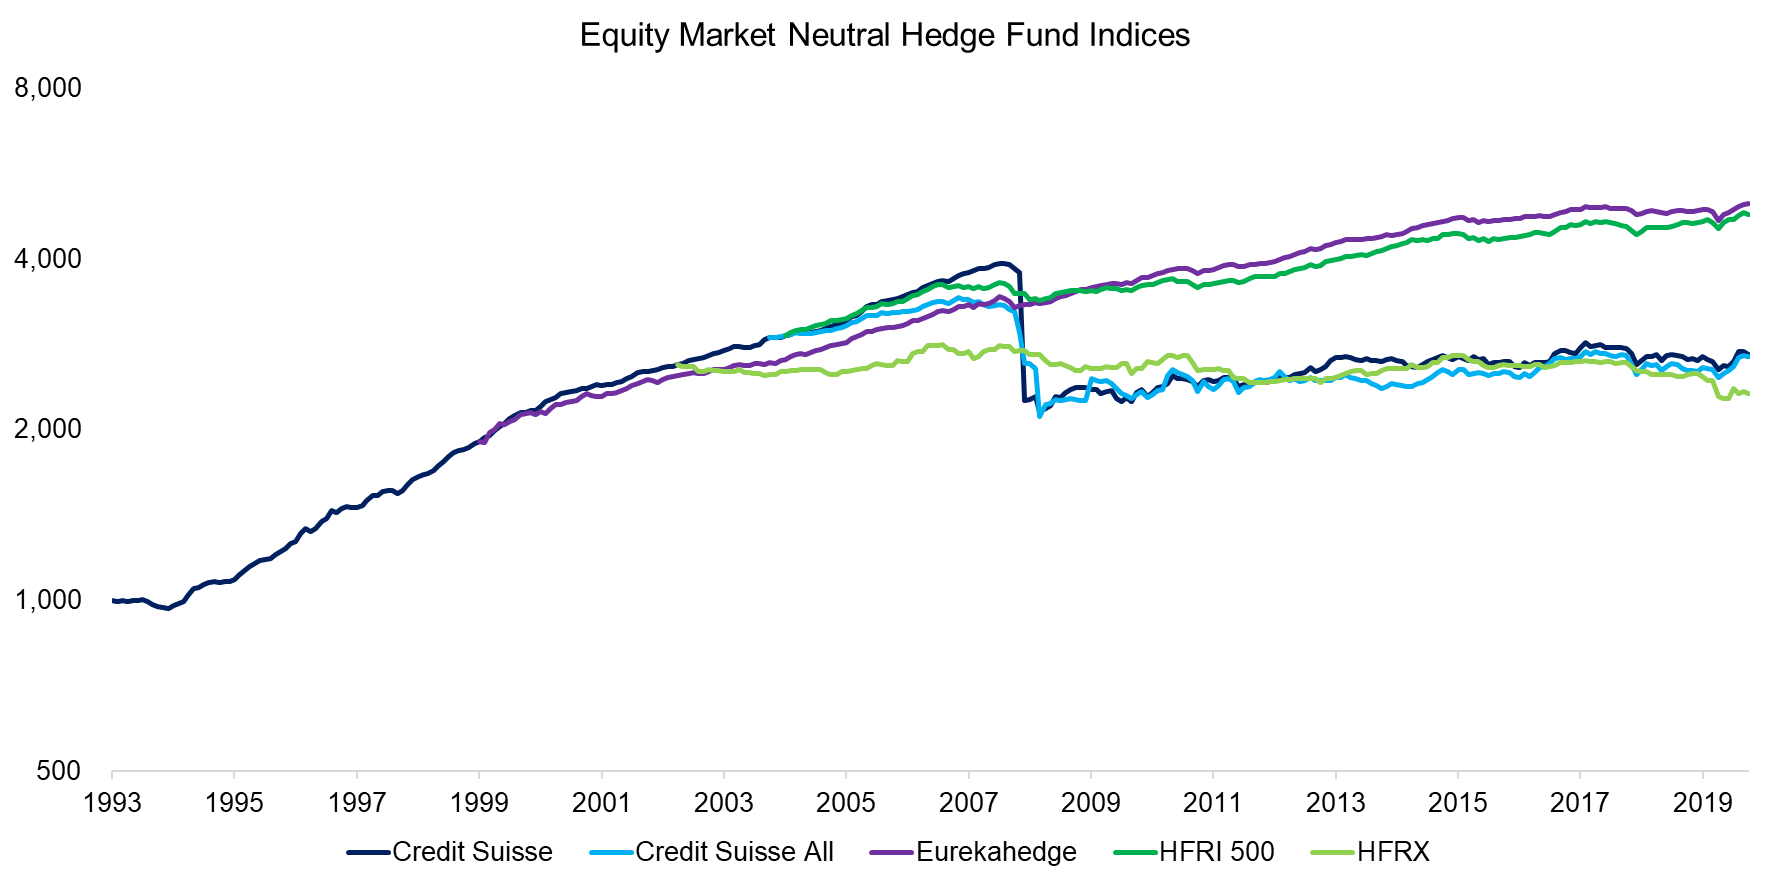 Equity Market Neutral Hedge Fund Indices